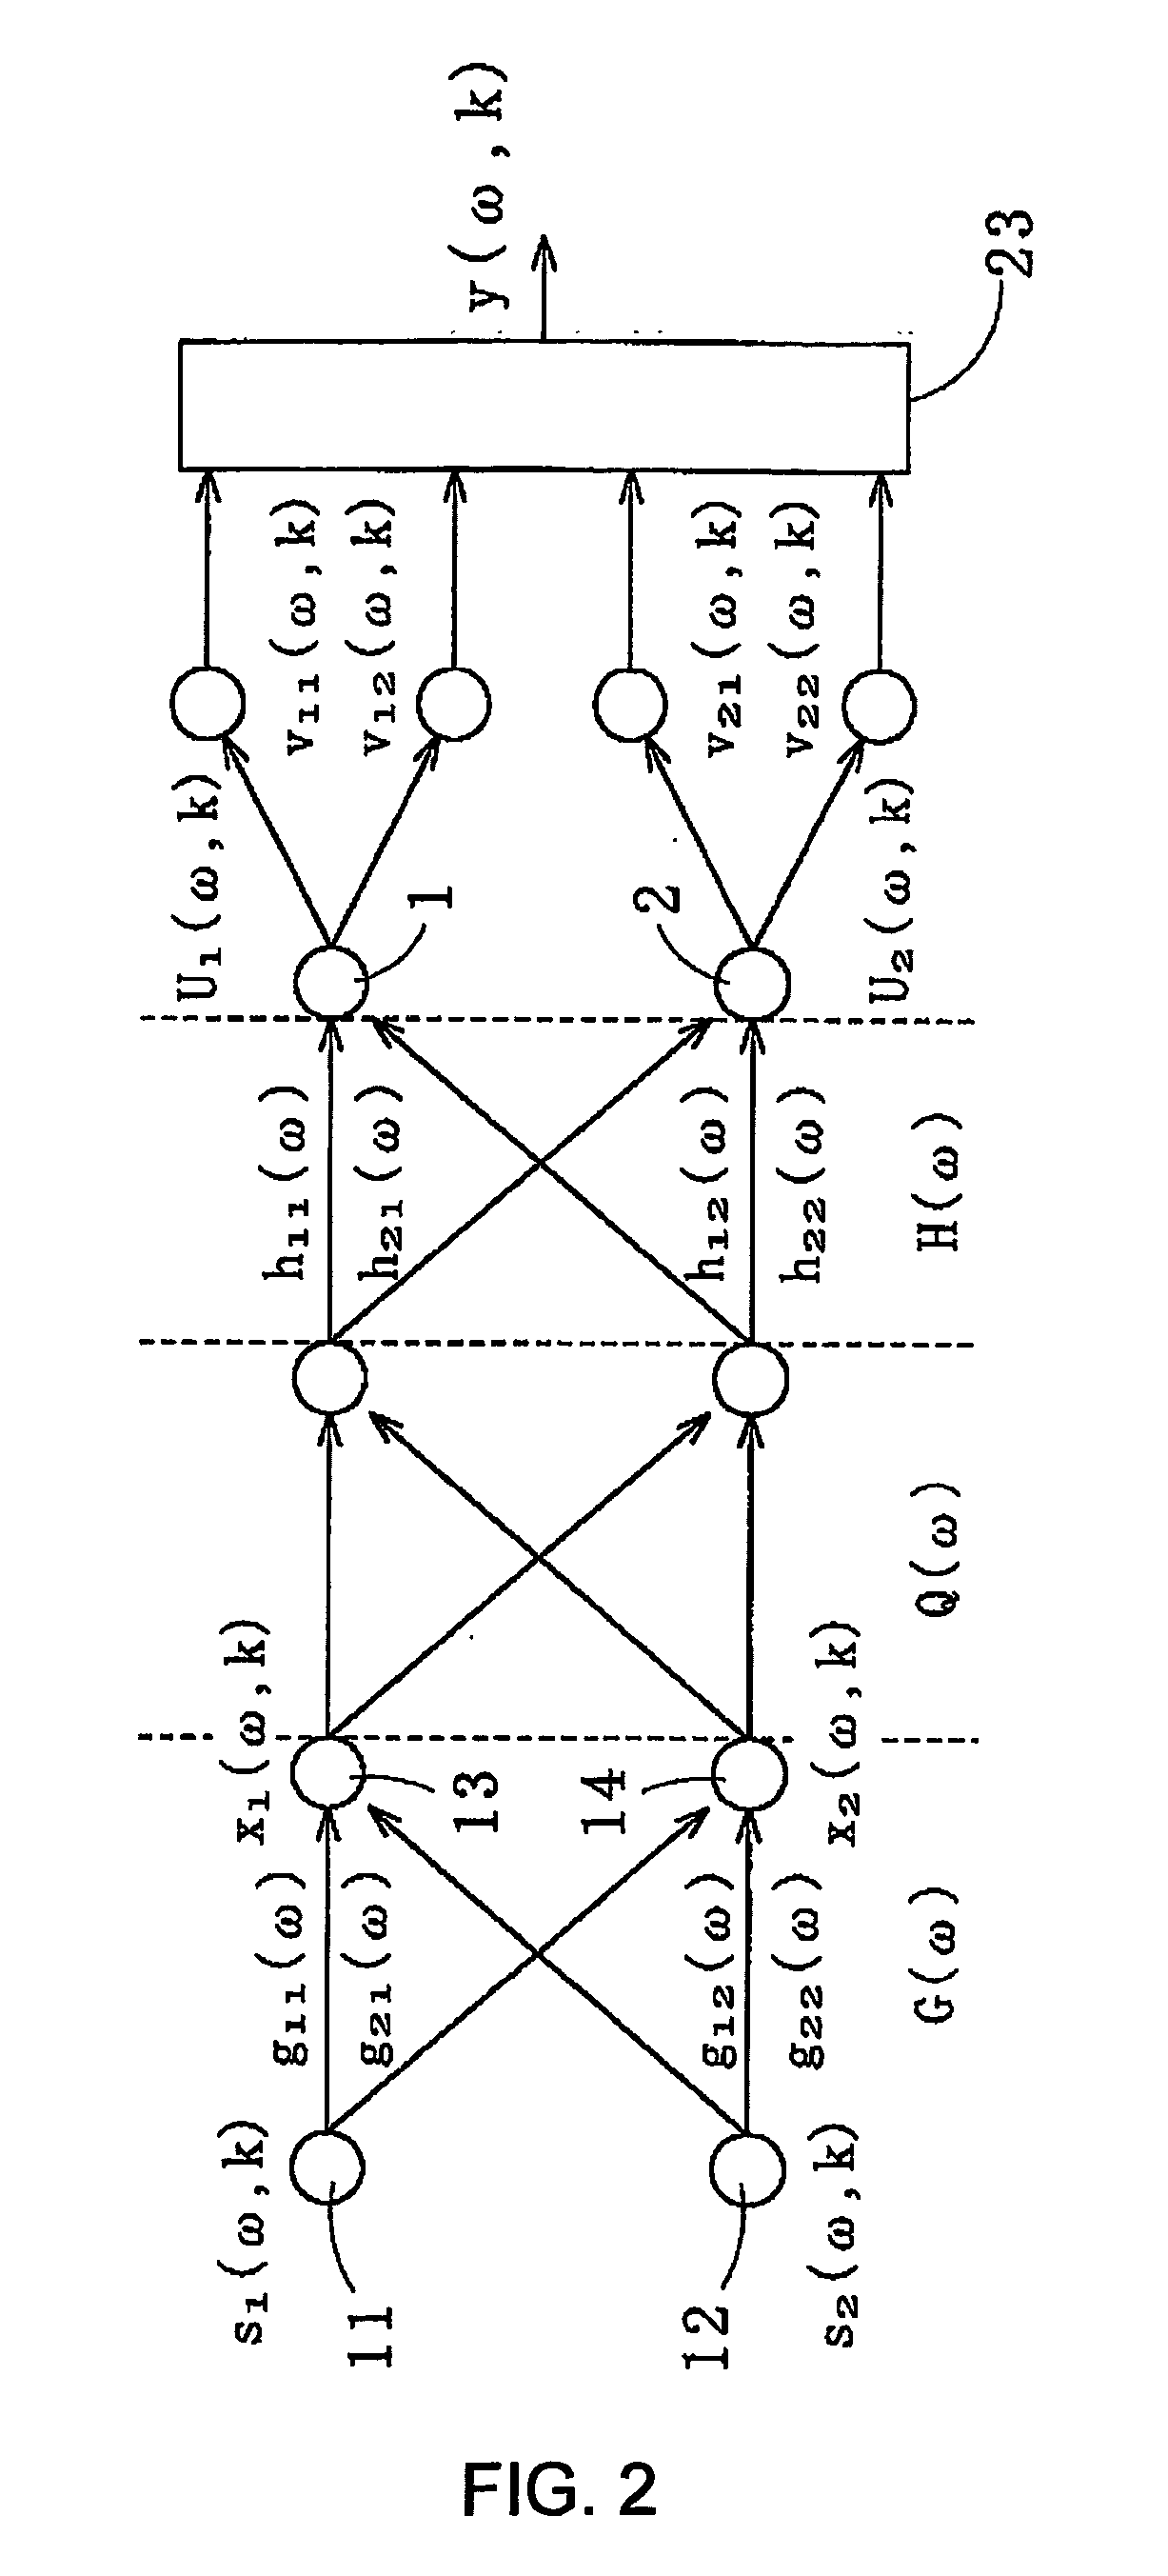 Method for recovering target speech based on amplitude distributions of separated signals